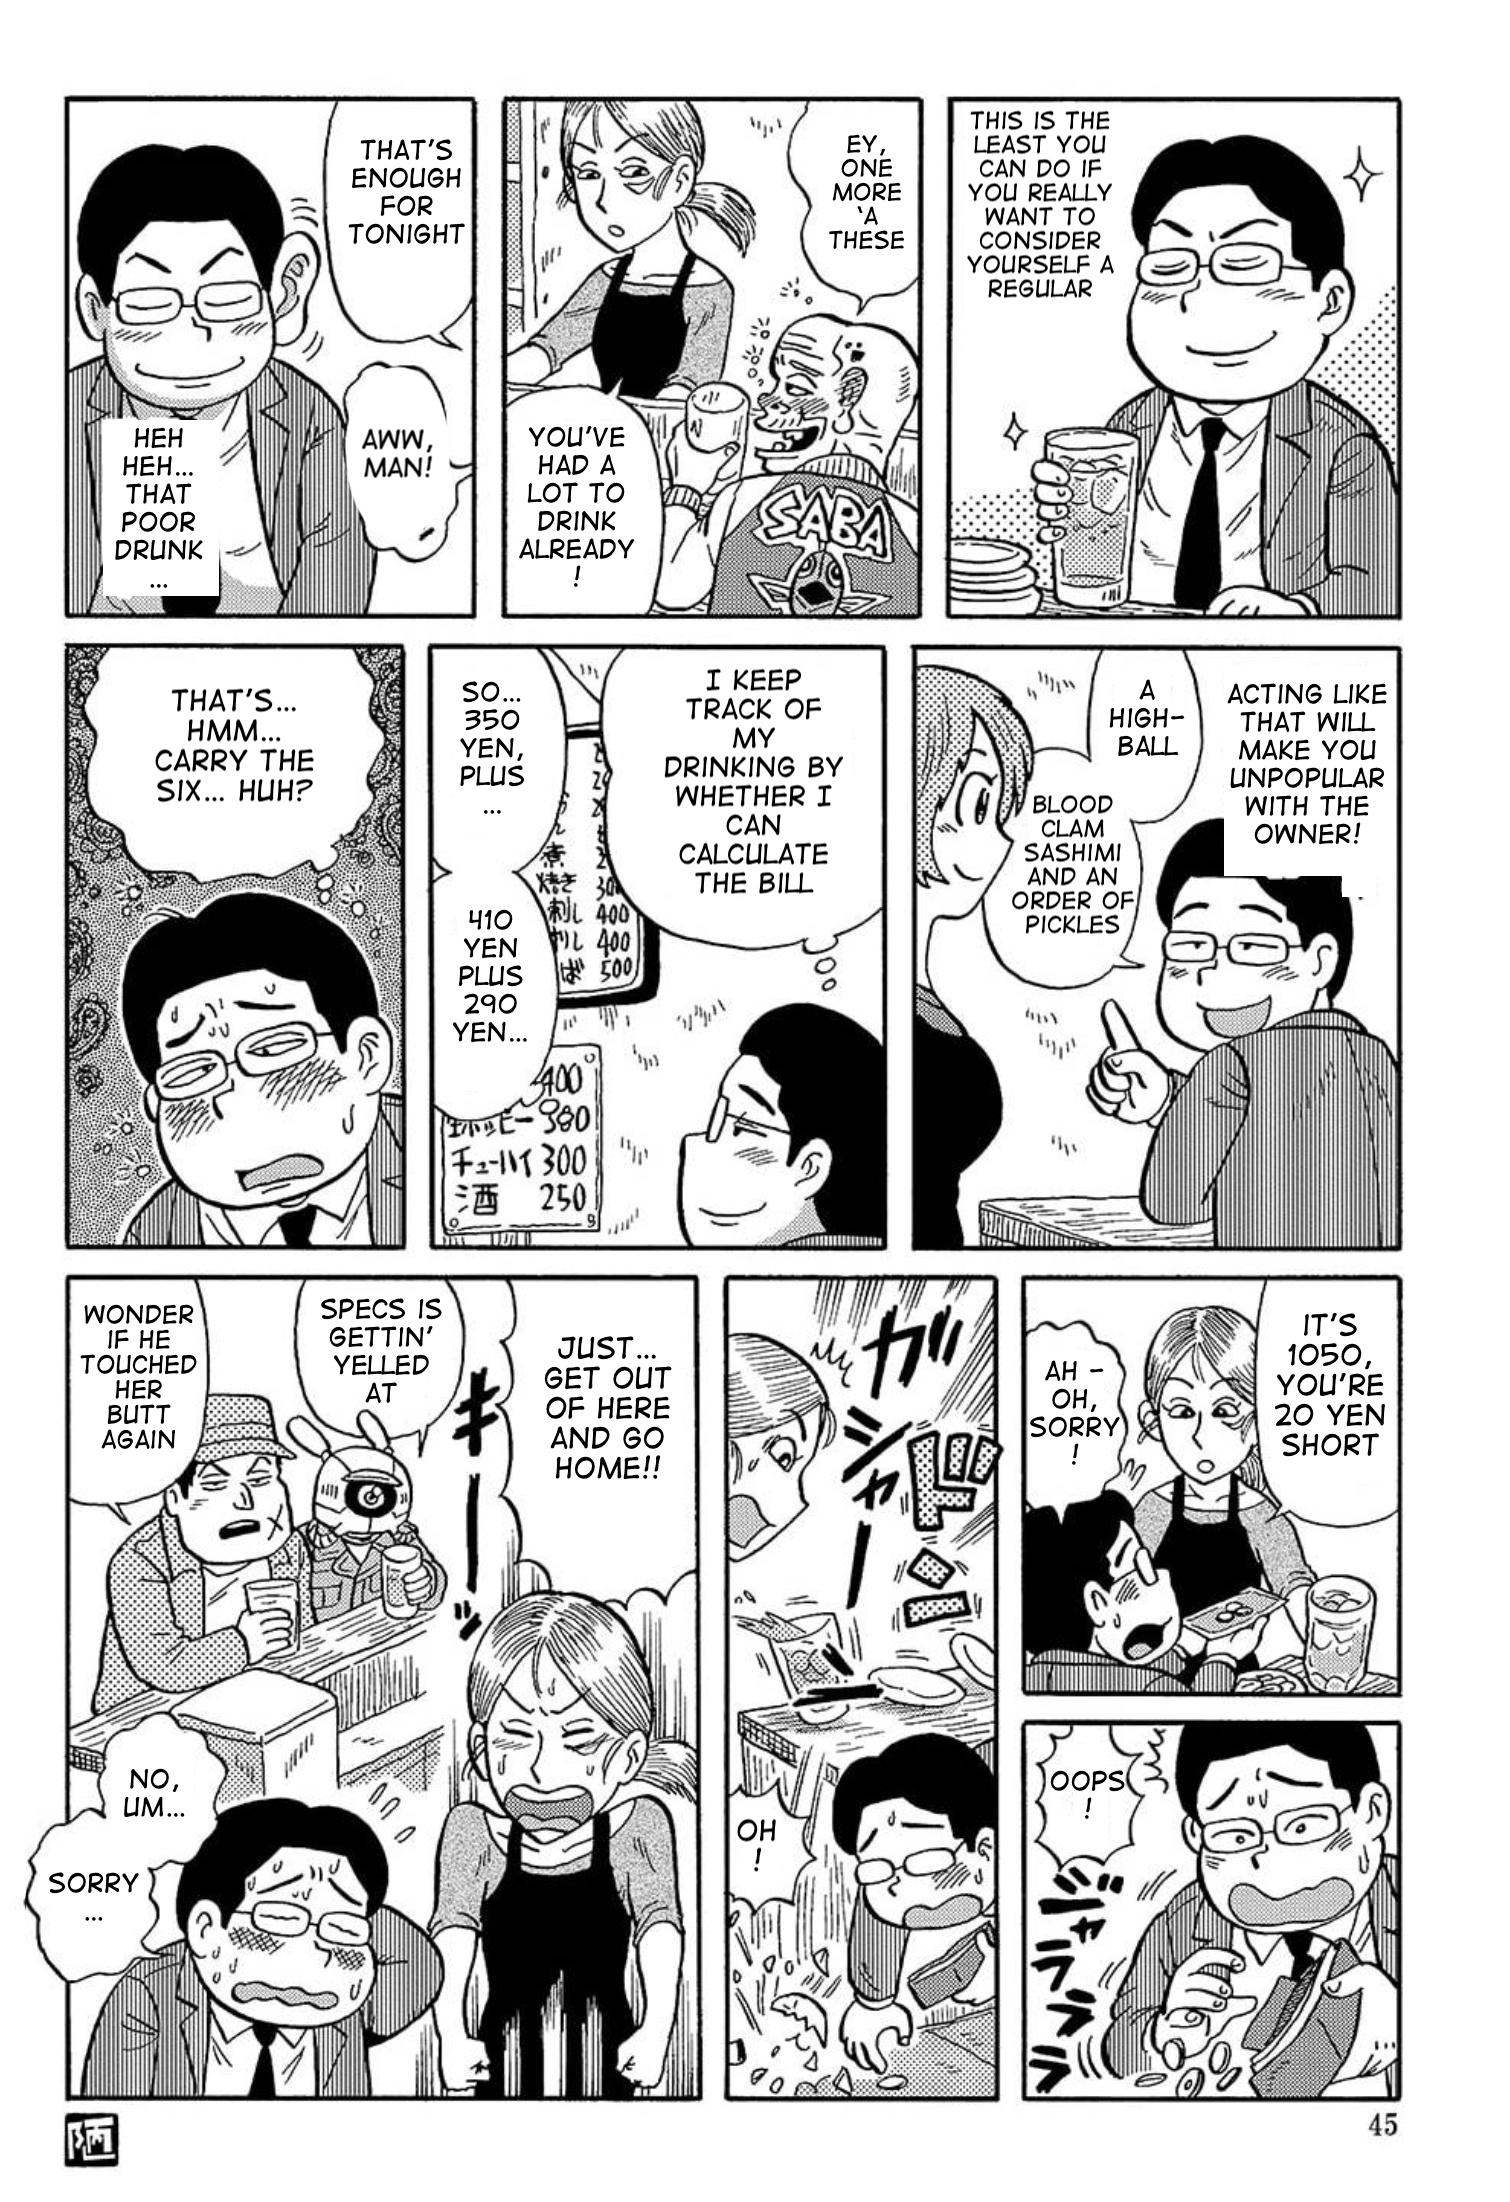 Uramachi Sakaba Vol.1 Chapter 9: The Specs Approach 2 - Picture 2